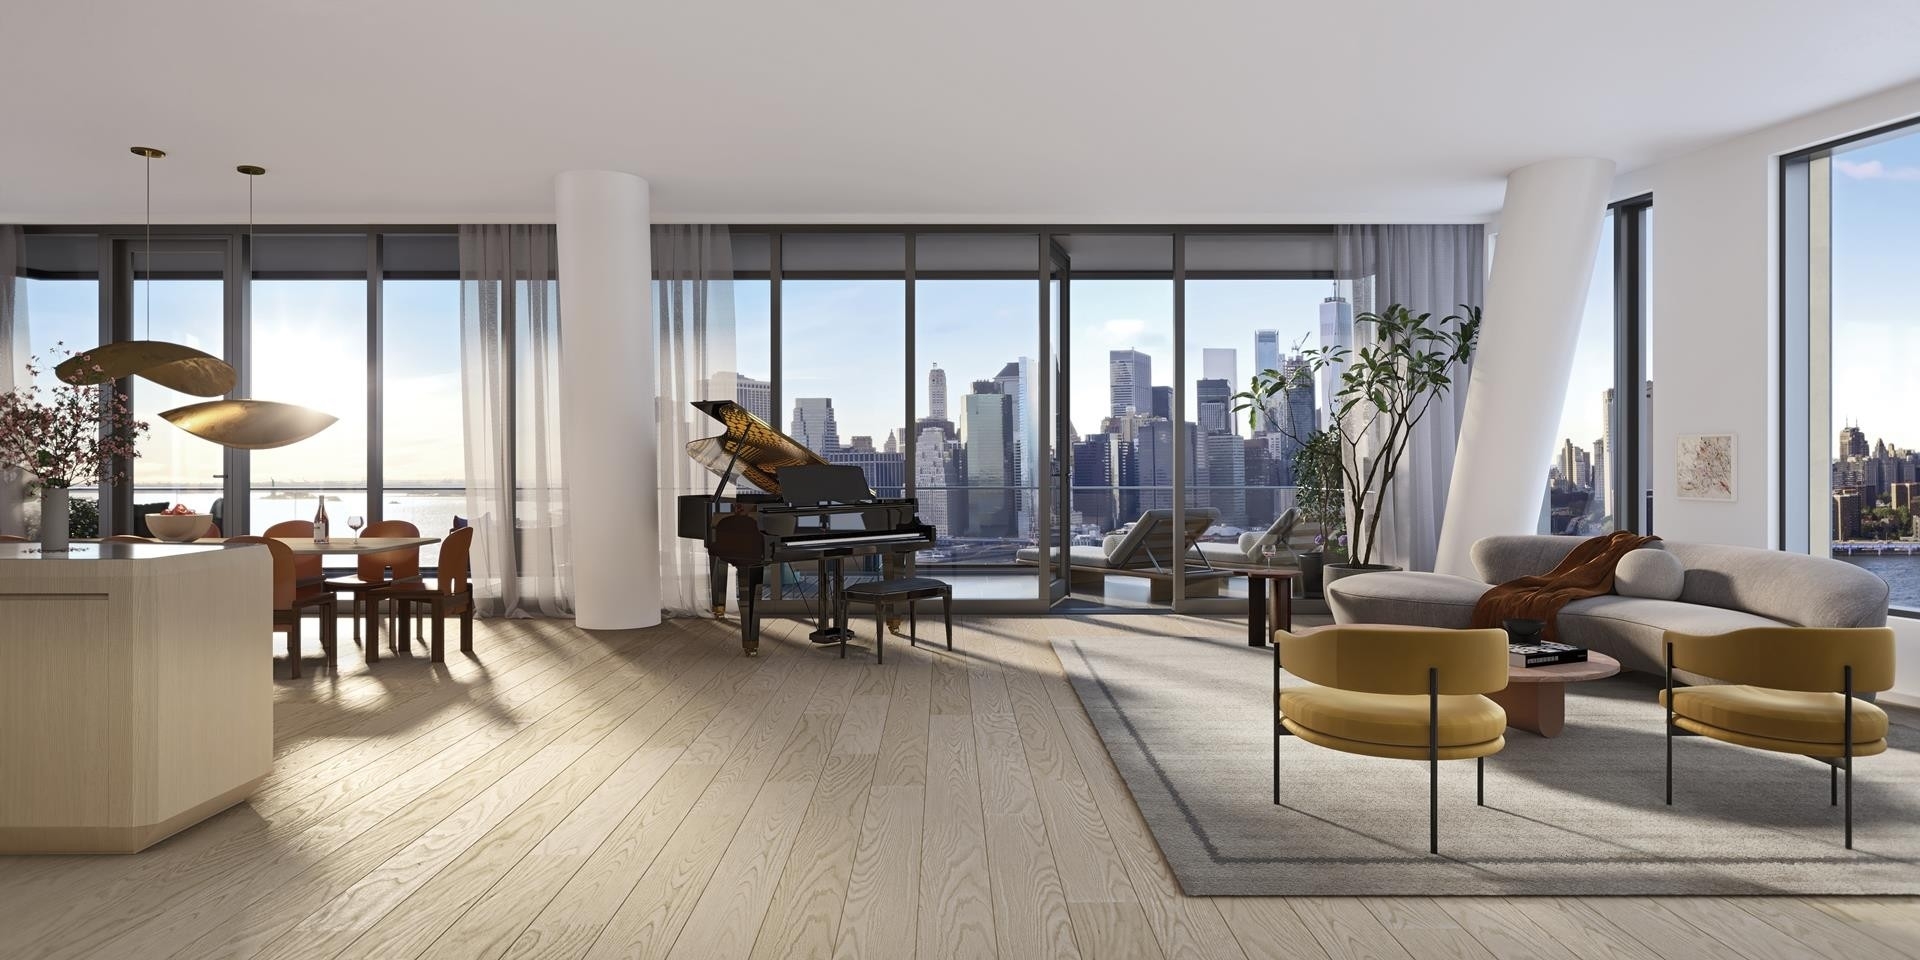 2. Condominiums for Sale at Olympia Dumbo, 30 FRONT ST, 24B Brooklyn, NY 11201